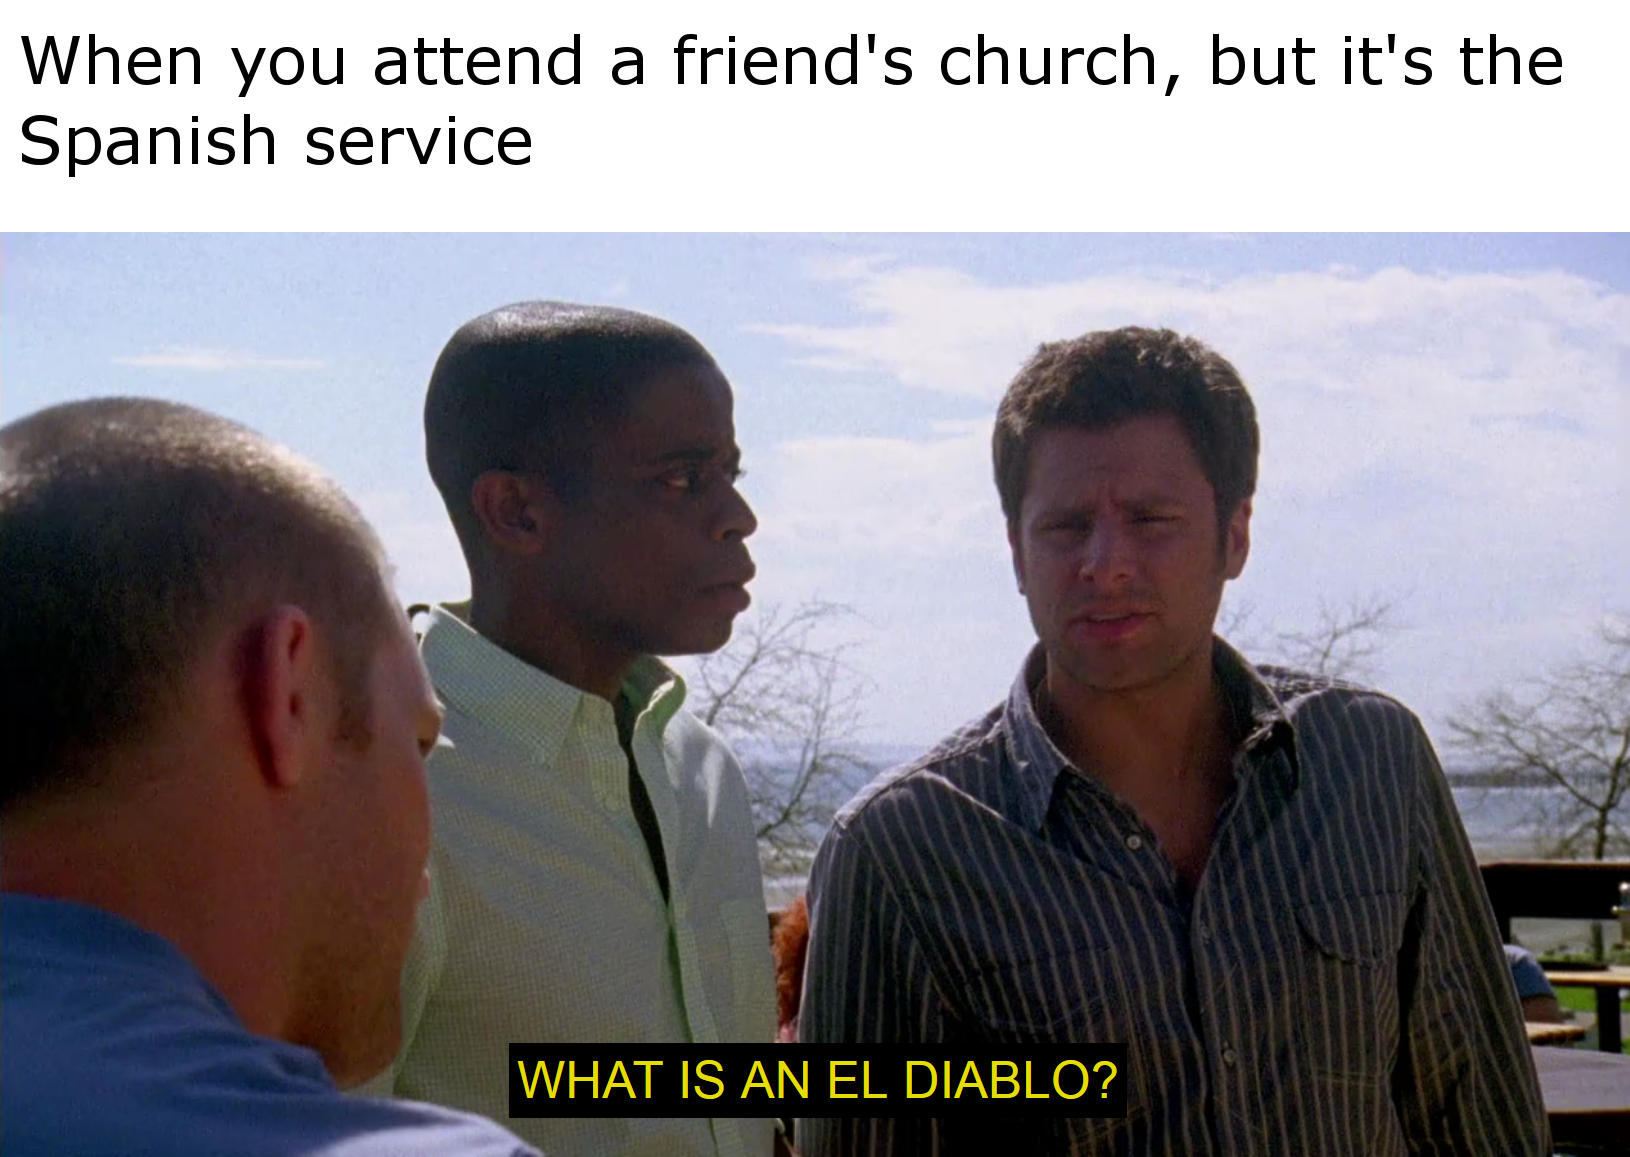 christian christian-memes christian text: When you attend a friend's church, but it's the Spanish service WHAT IS AN EL DIABLO? 